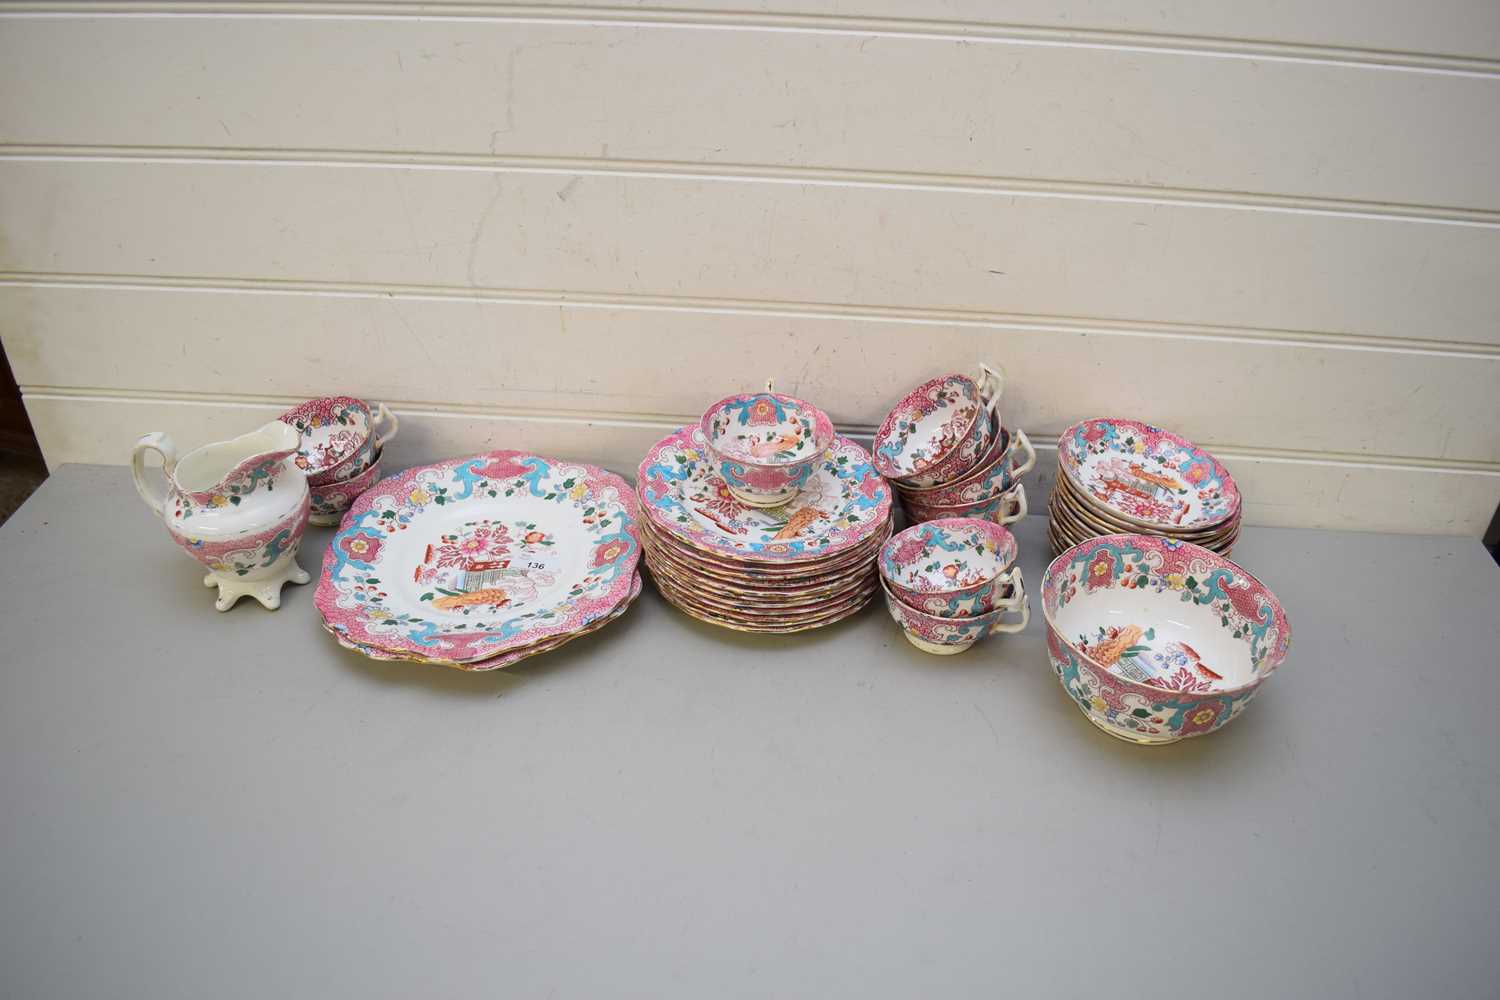 COLLECTION OF 19TH CENTURY STAFFORDSHIRE FLORAL DECORATED TEA WARES, TRANSFER PRINTED CROWN MARK